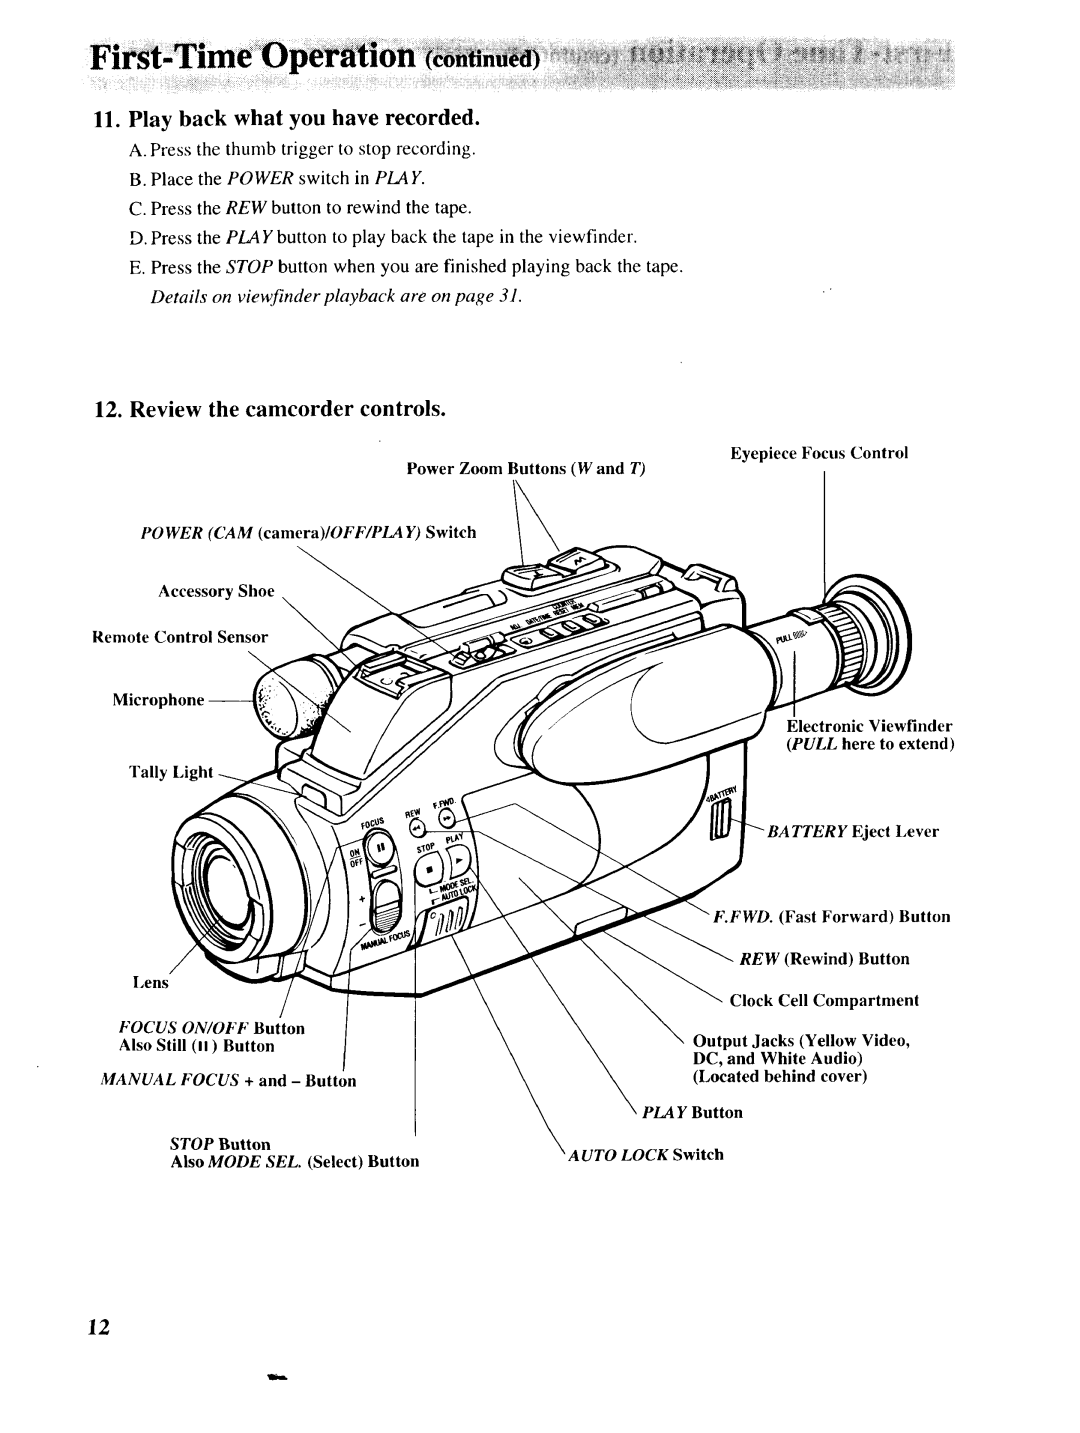 RCA P46728 Play back what you have recorded, Review the camcorder controls, Focus ON/OFF Button, Manual Focus + and Button 